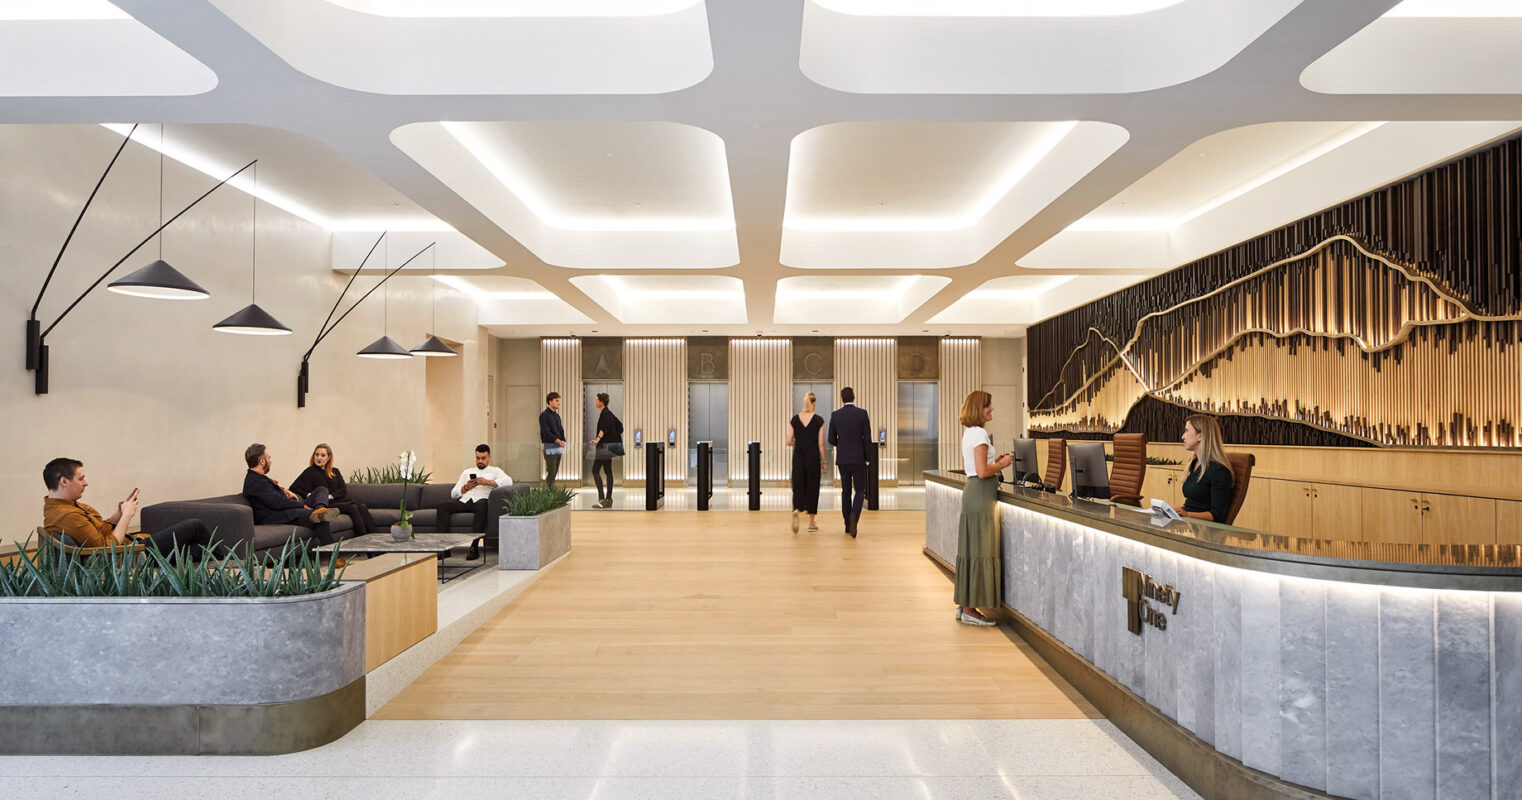 A modern and sleek office lobby with people engaged in various activities, featuring geometric lighting fixtures, wood paneling, and a stylish reception desk.